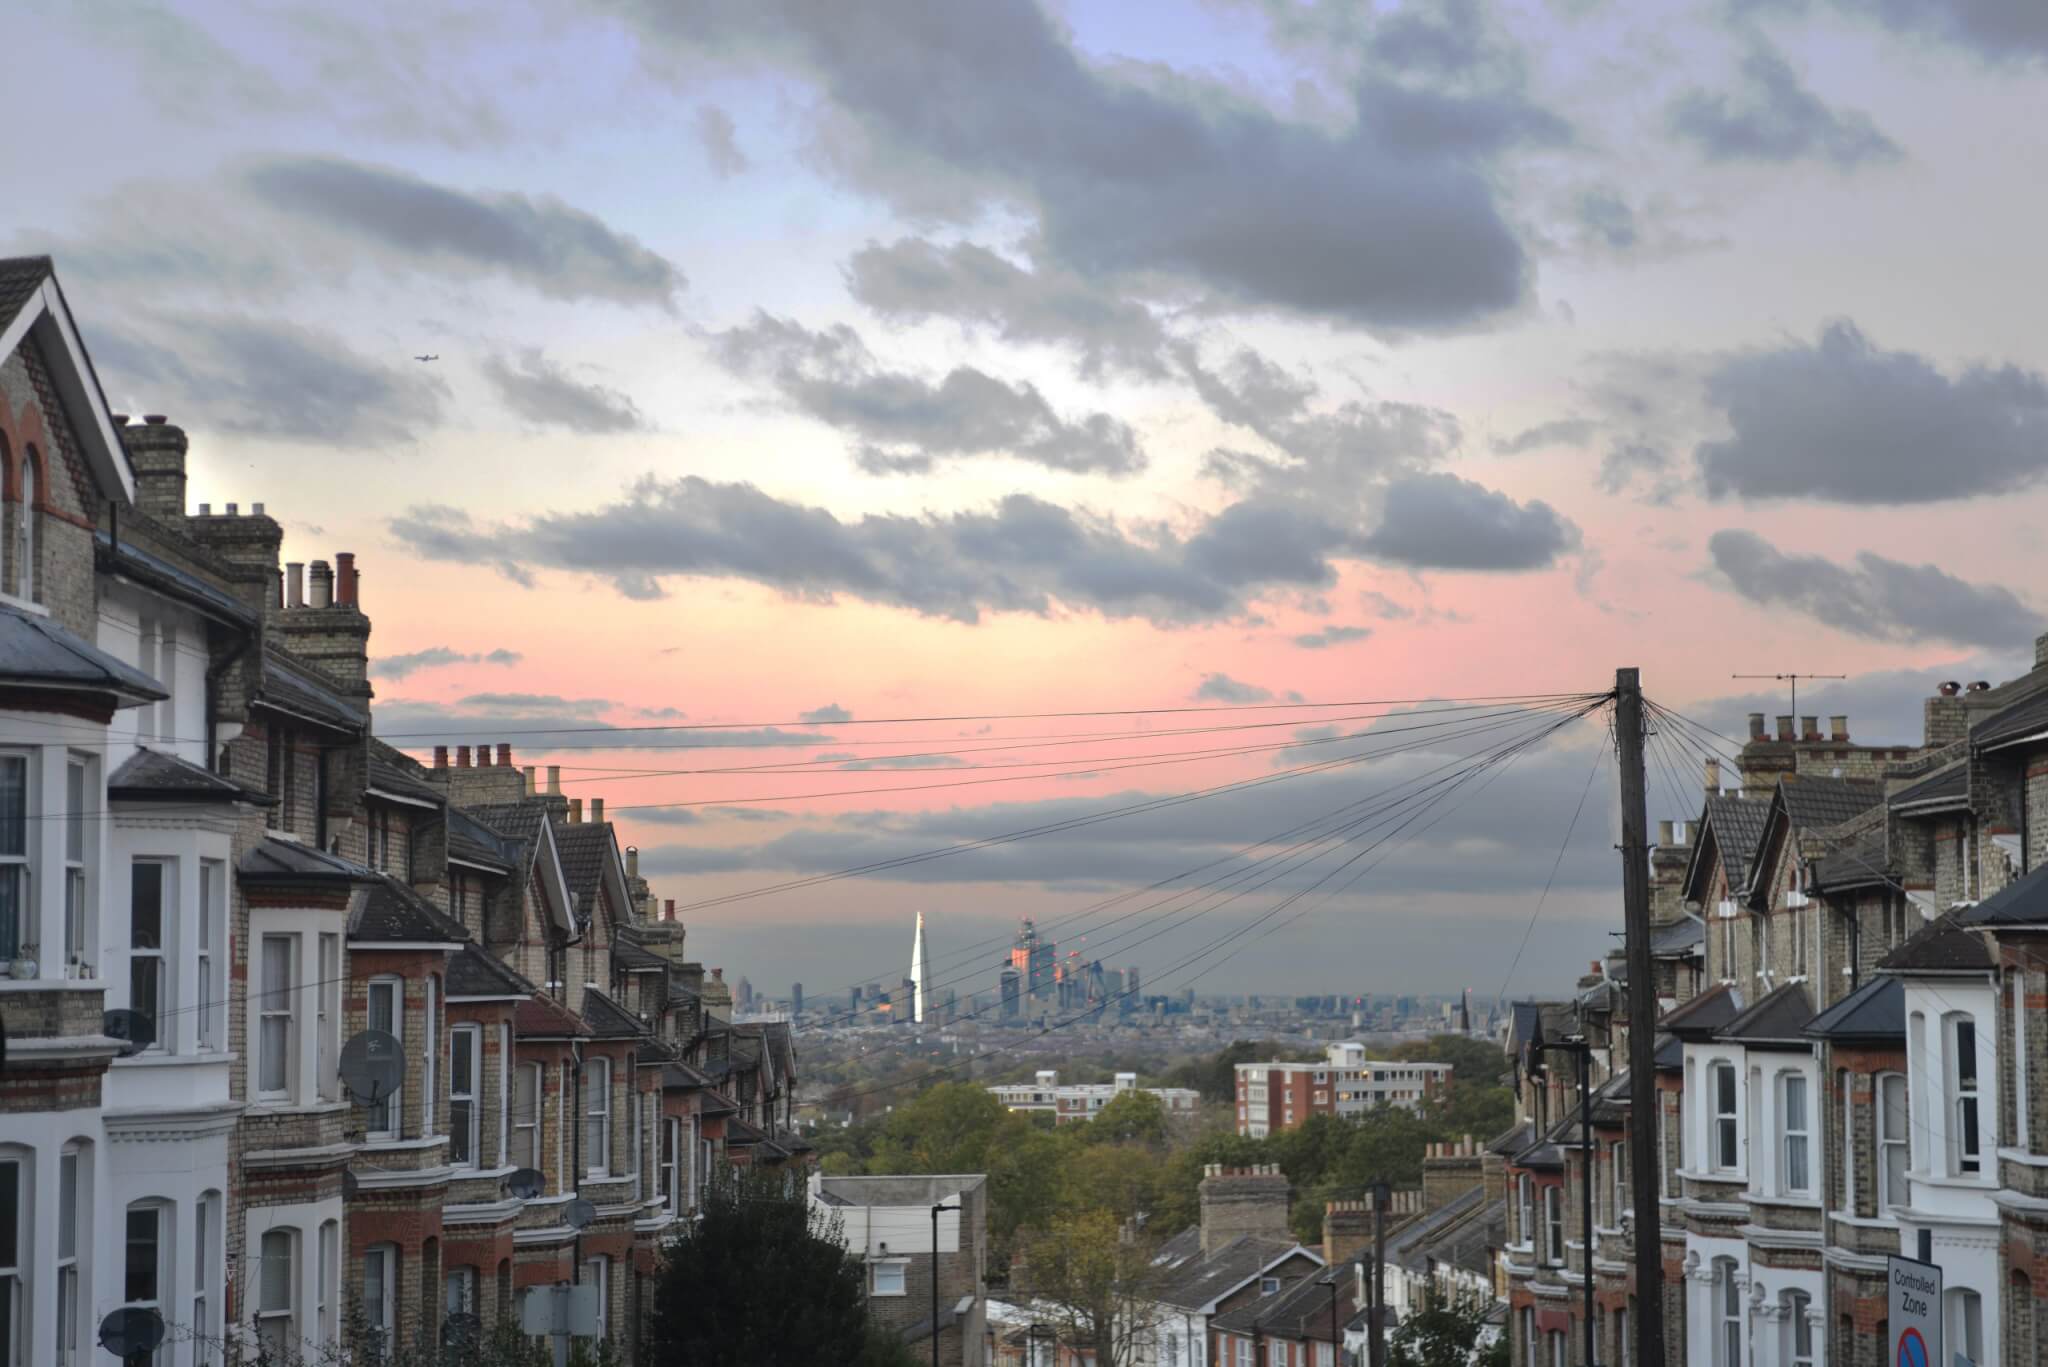 Suburban street in Crystal palace south london WITH THE SHARD AND THE CITY OF LONDON ON THE HORIZON